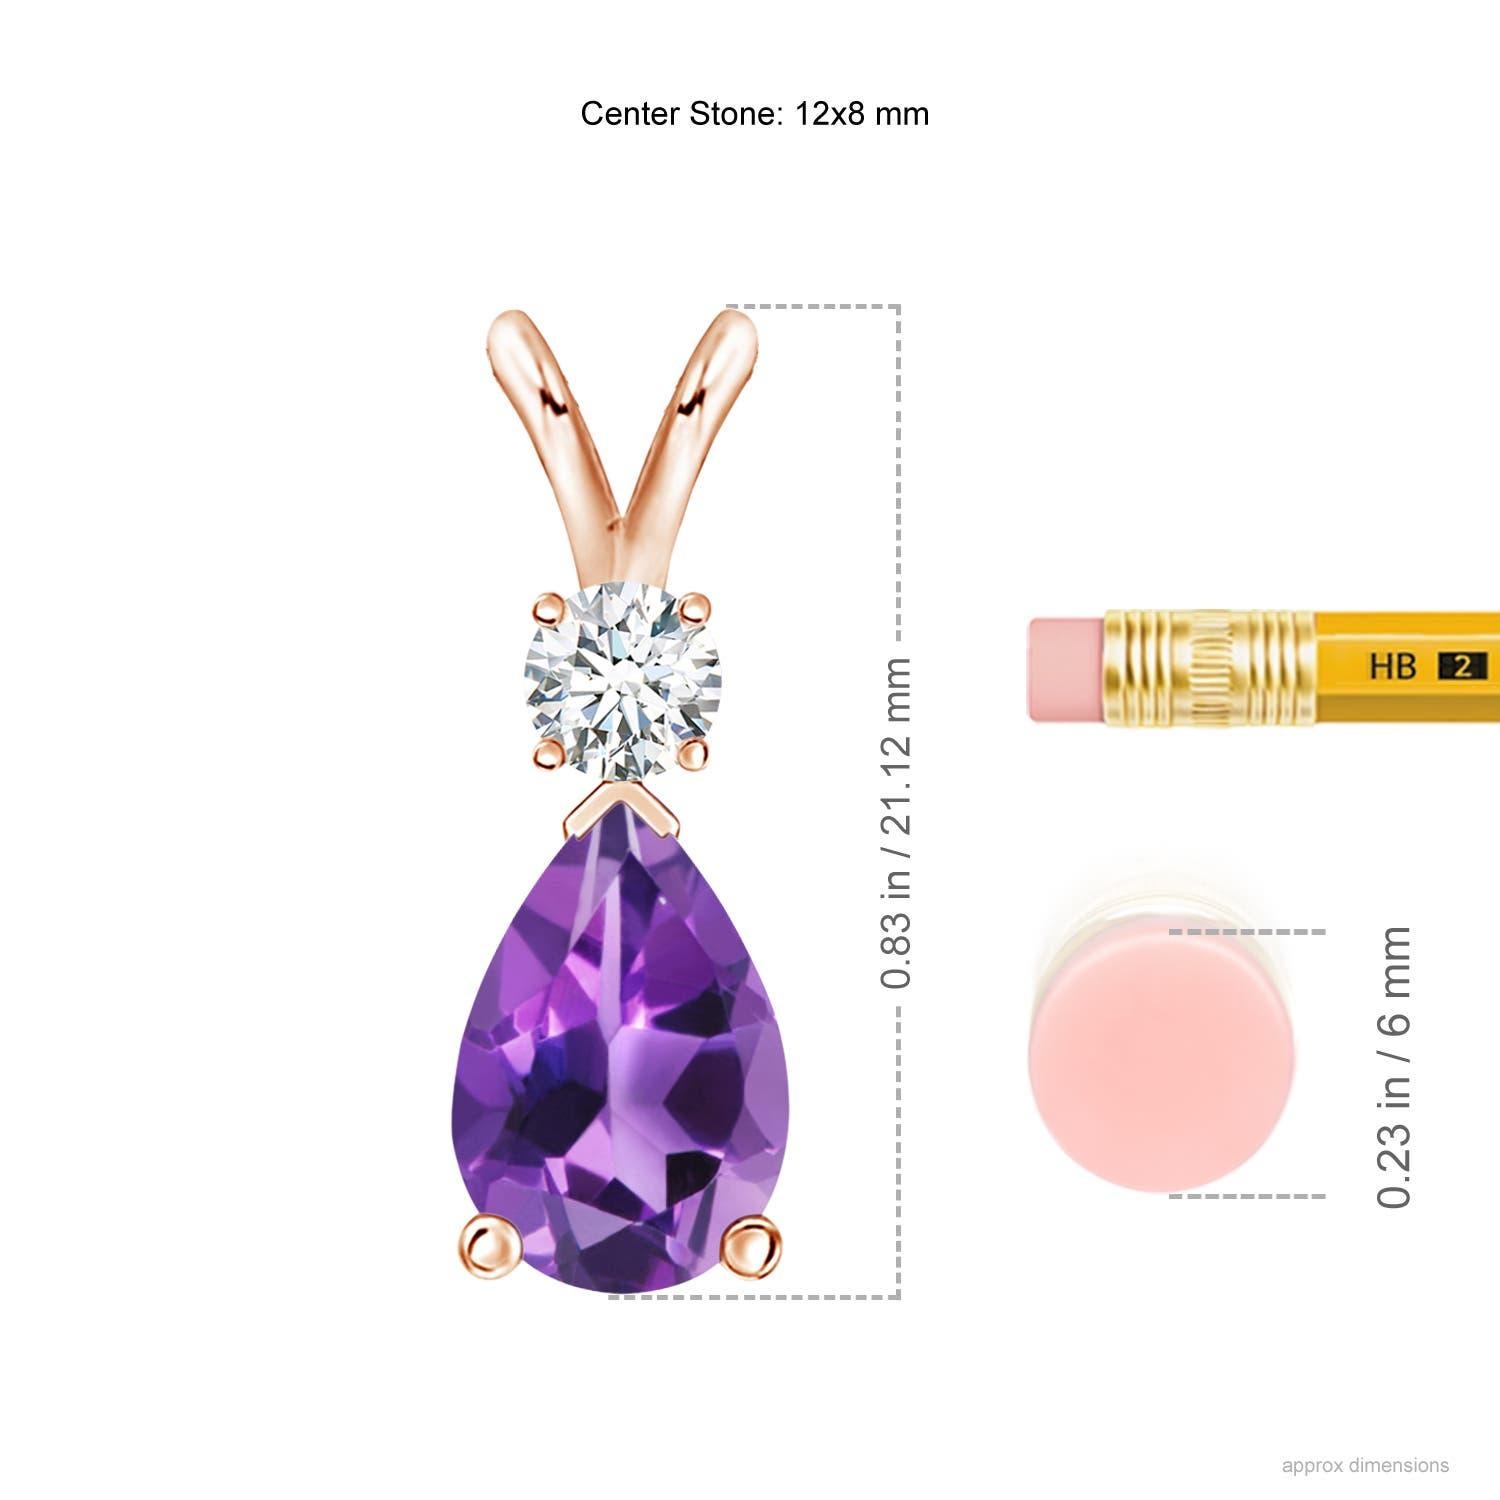 A pear-shaped deep purple amethyst is secured in a prong setting and embellished with a diamond accent on the top. Simple yet stunning, this teardrop amethyst pendant with V bale is sculpted in 14k rose gold.